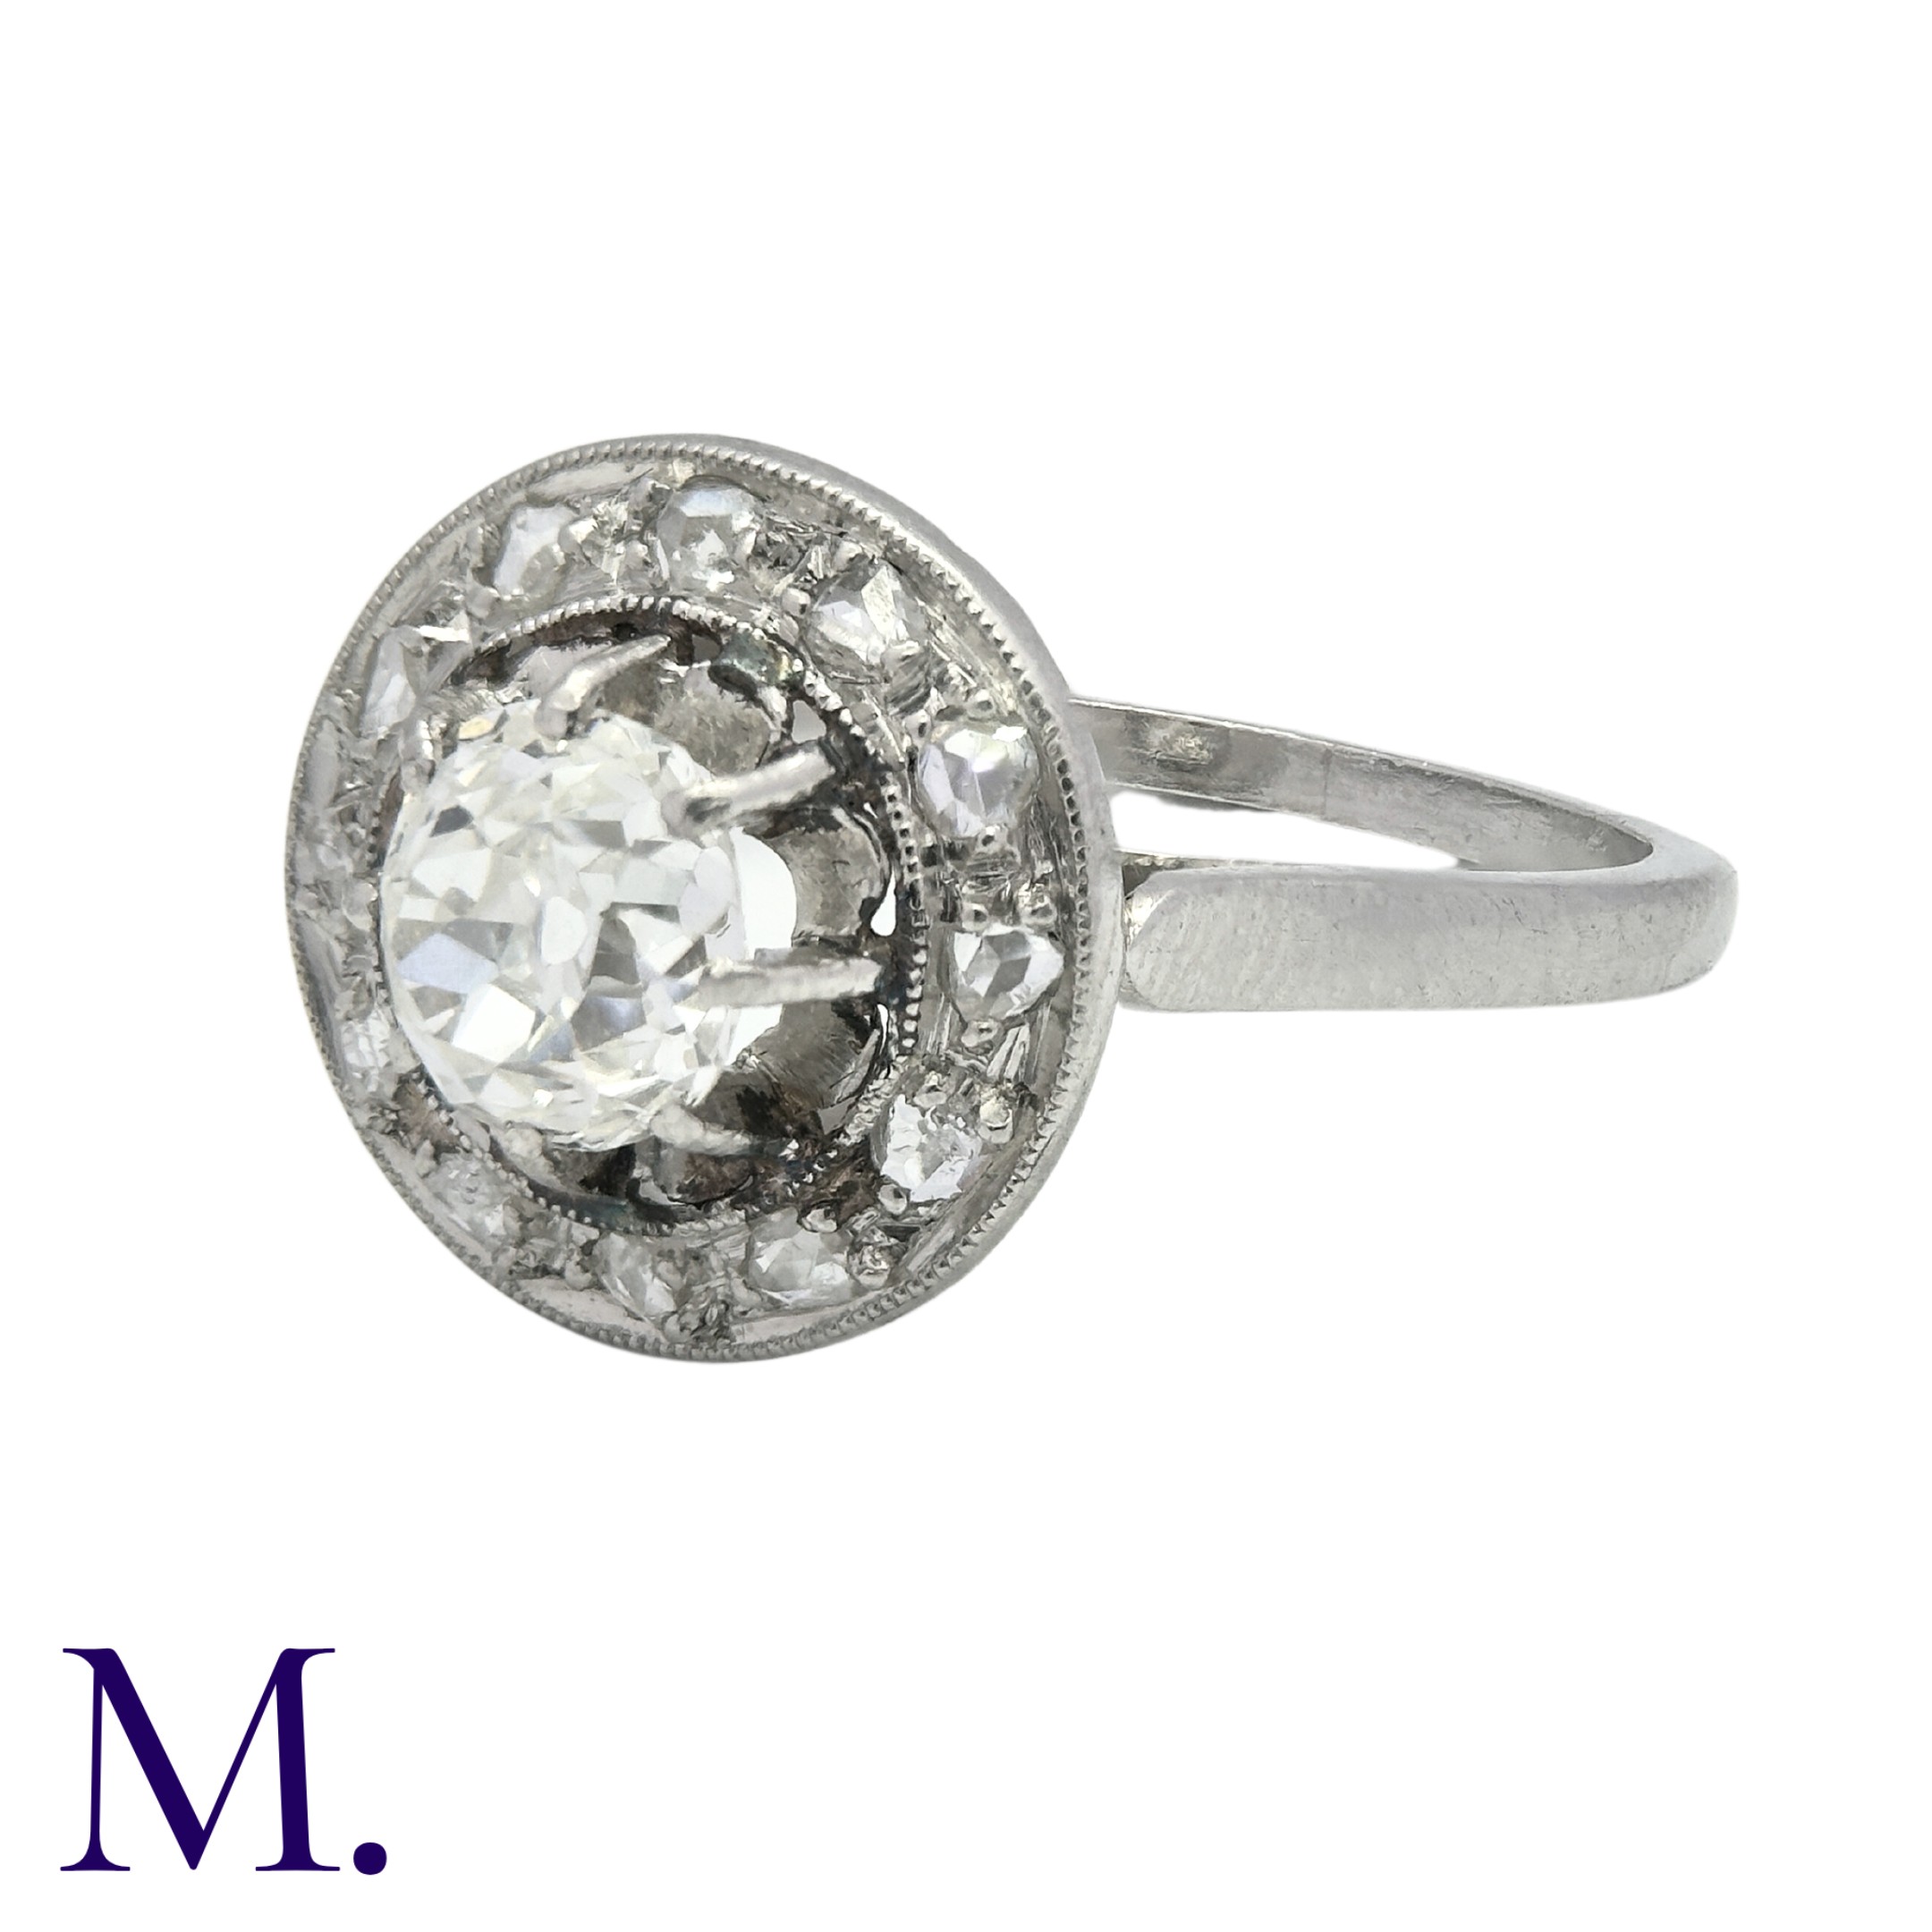 A Diamond Cluster Ring in platinum, set with an old cut diamond of approximately 1.0ct to the centre